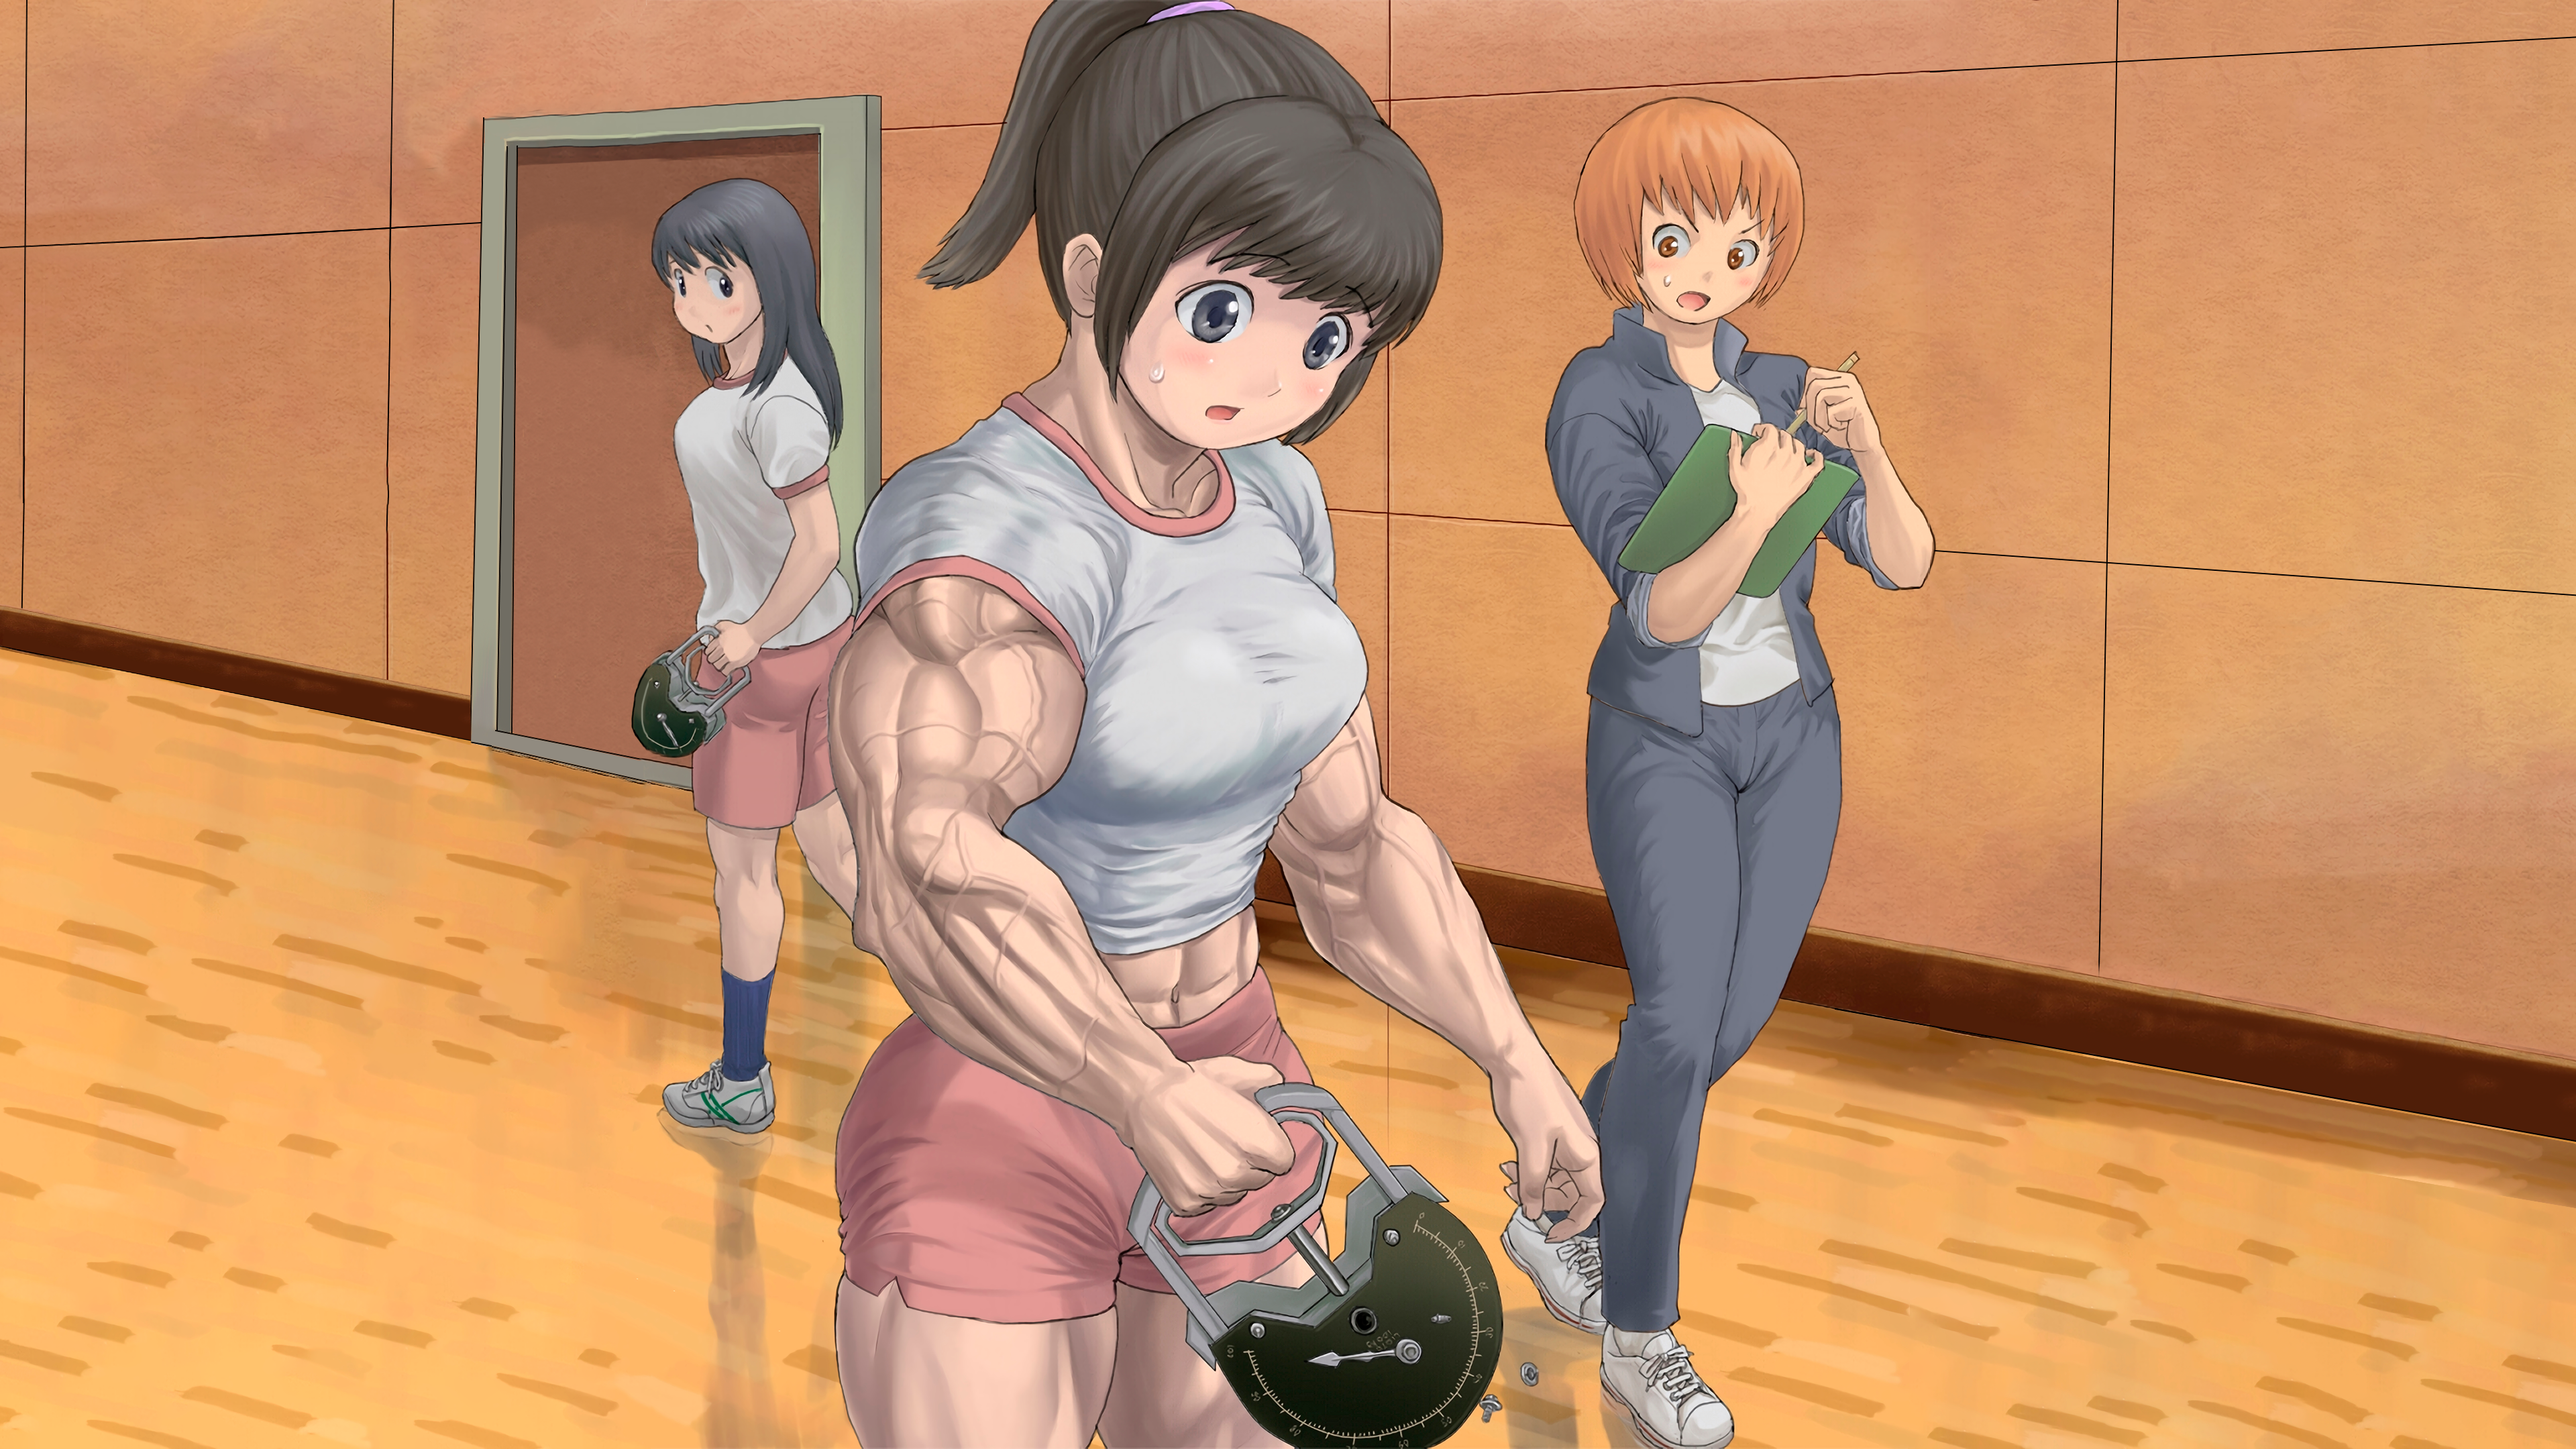 Anime 3840x2160 muscles muscular anime girls toned female artwork strong woman weightlifting